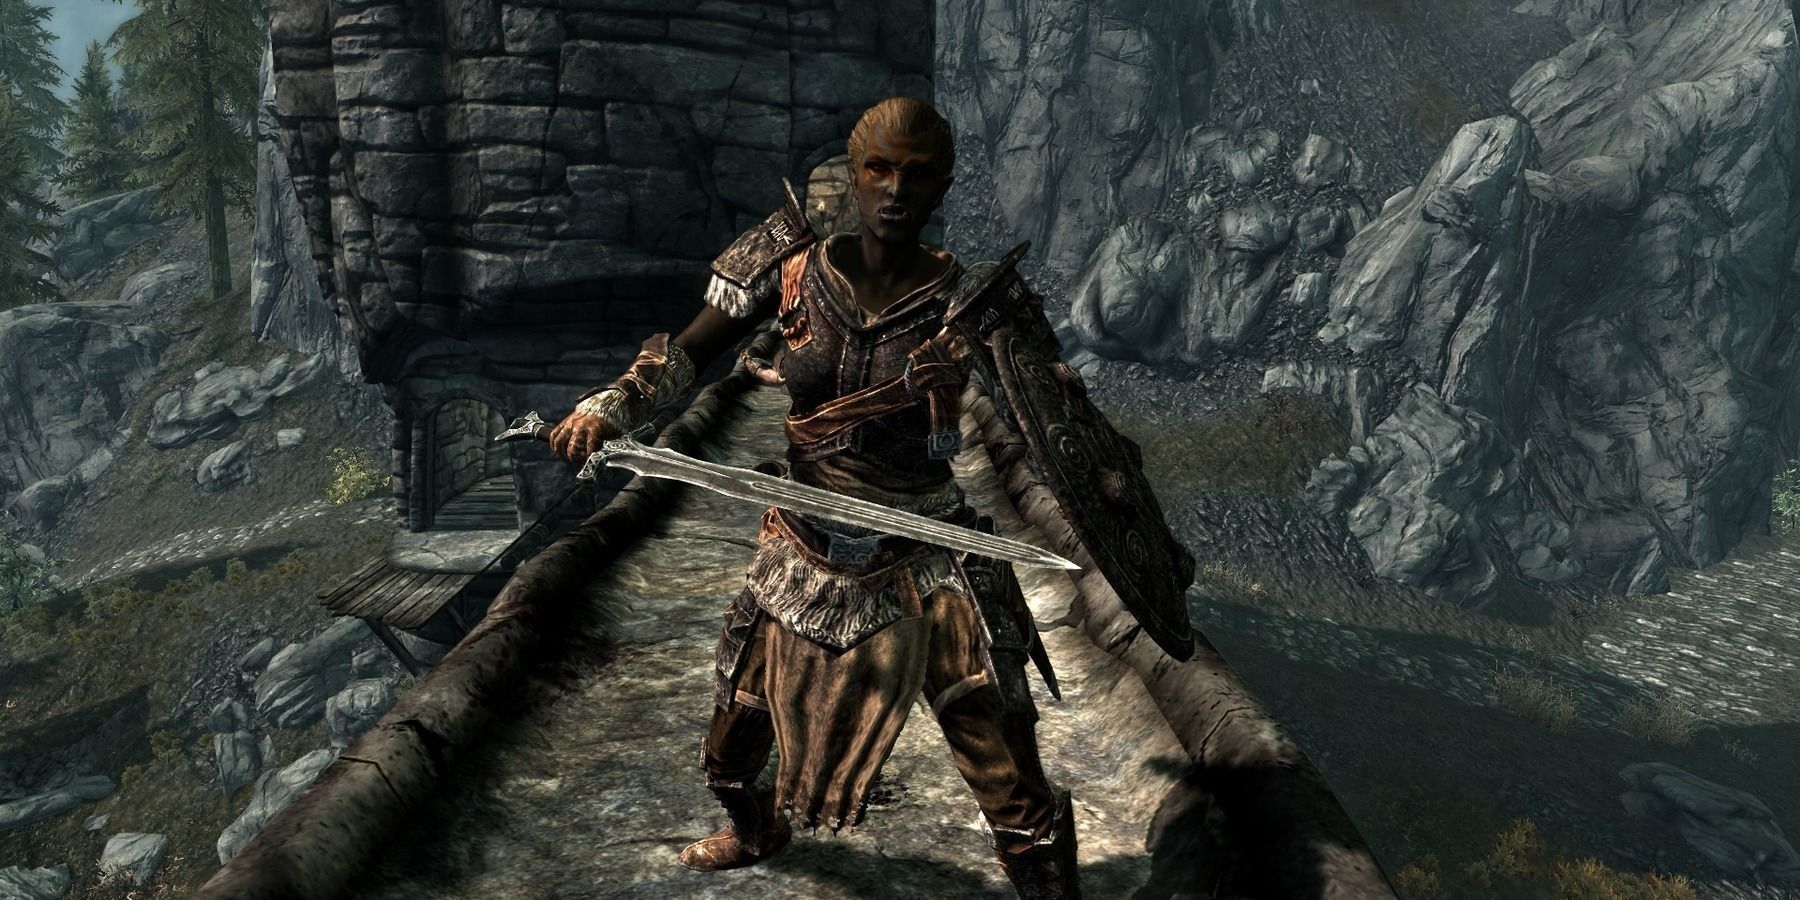 Skyrim Gains Middle Earth's Trademarked Nemesis System Through Mod